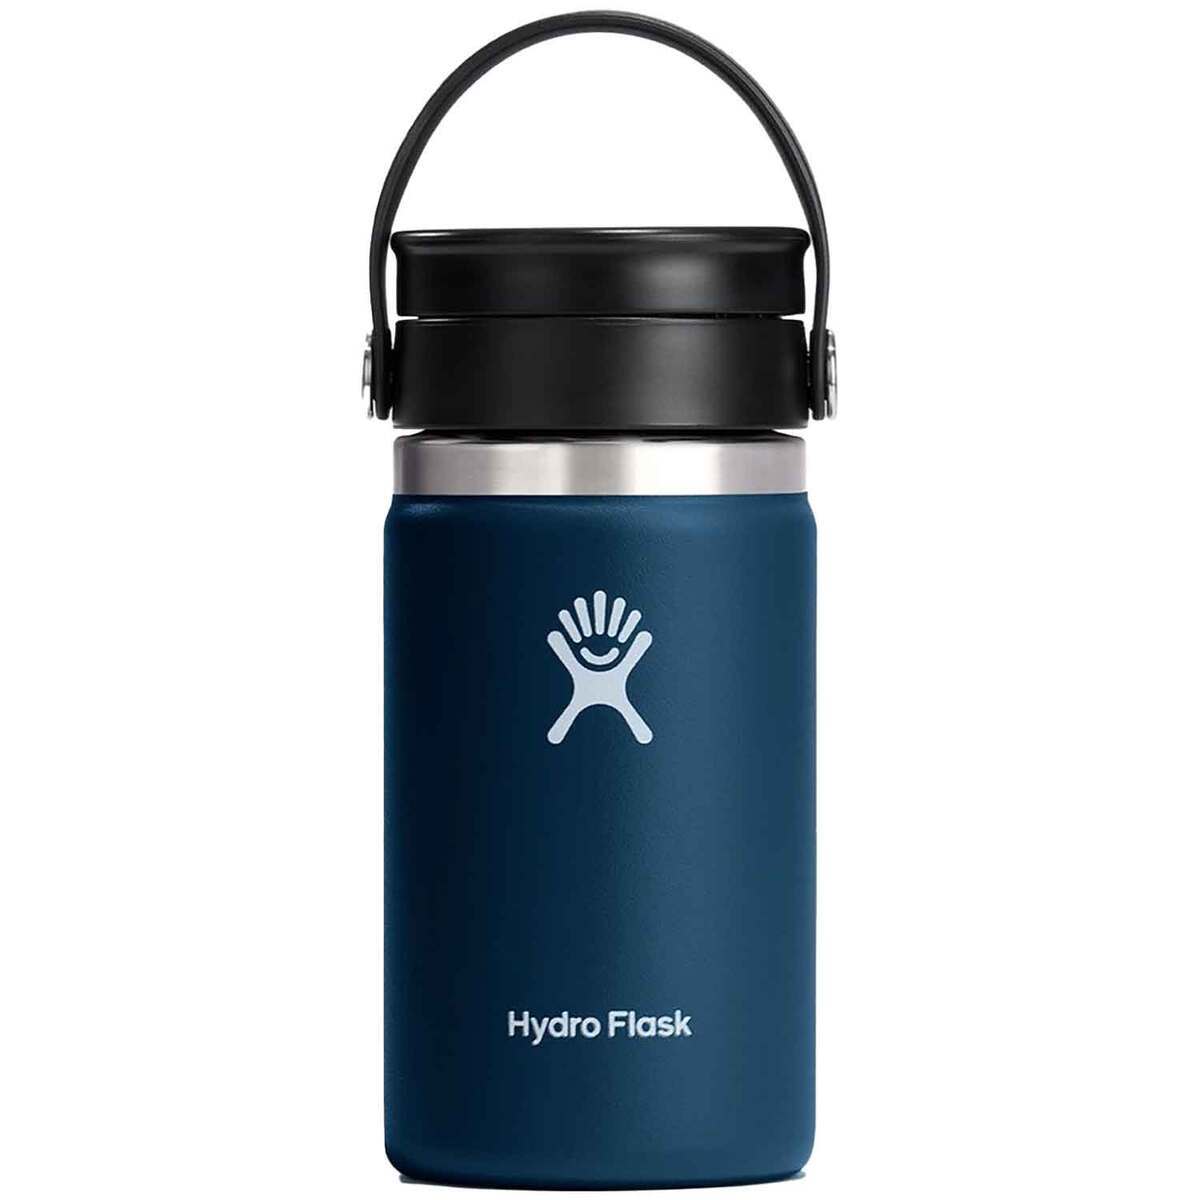 Review: Hydro Flask 25 oz Wine Bottle And 10 oz Tumbler - Trail to Peak